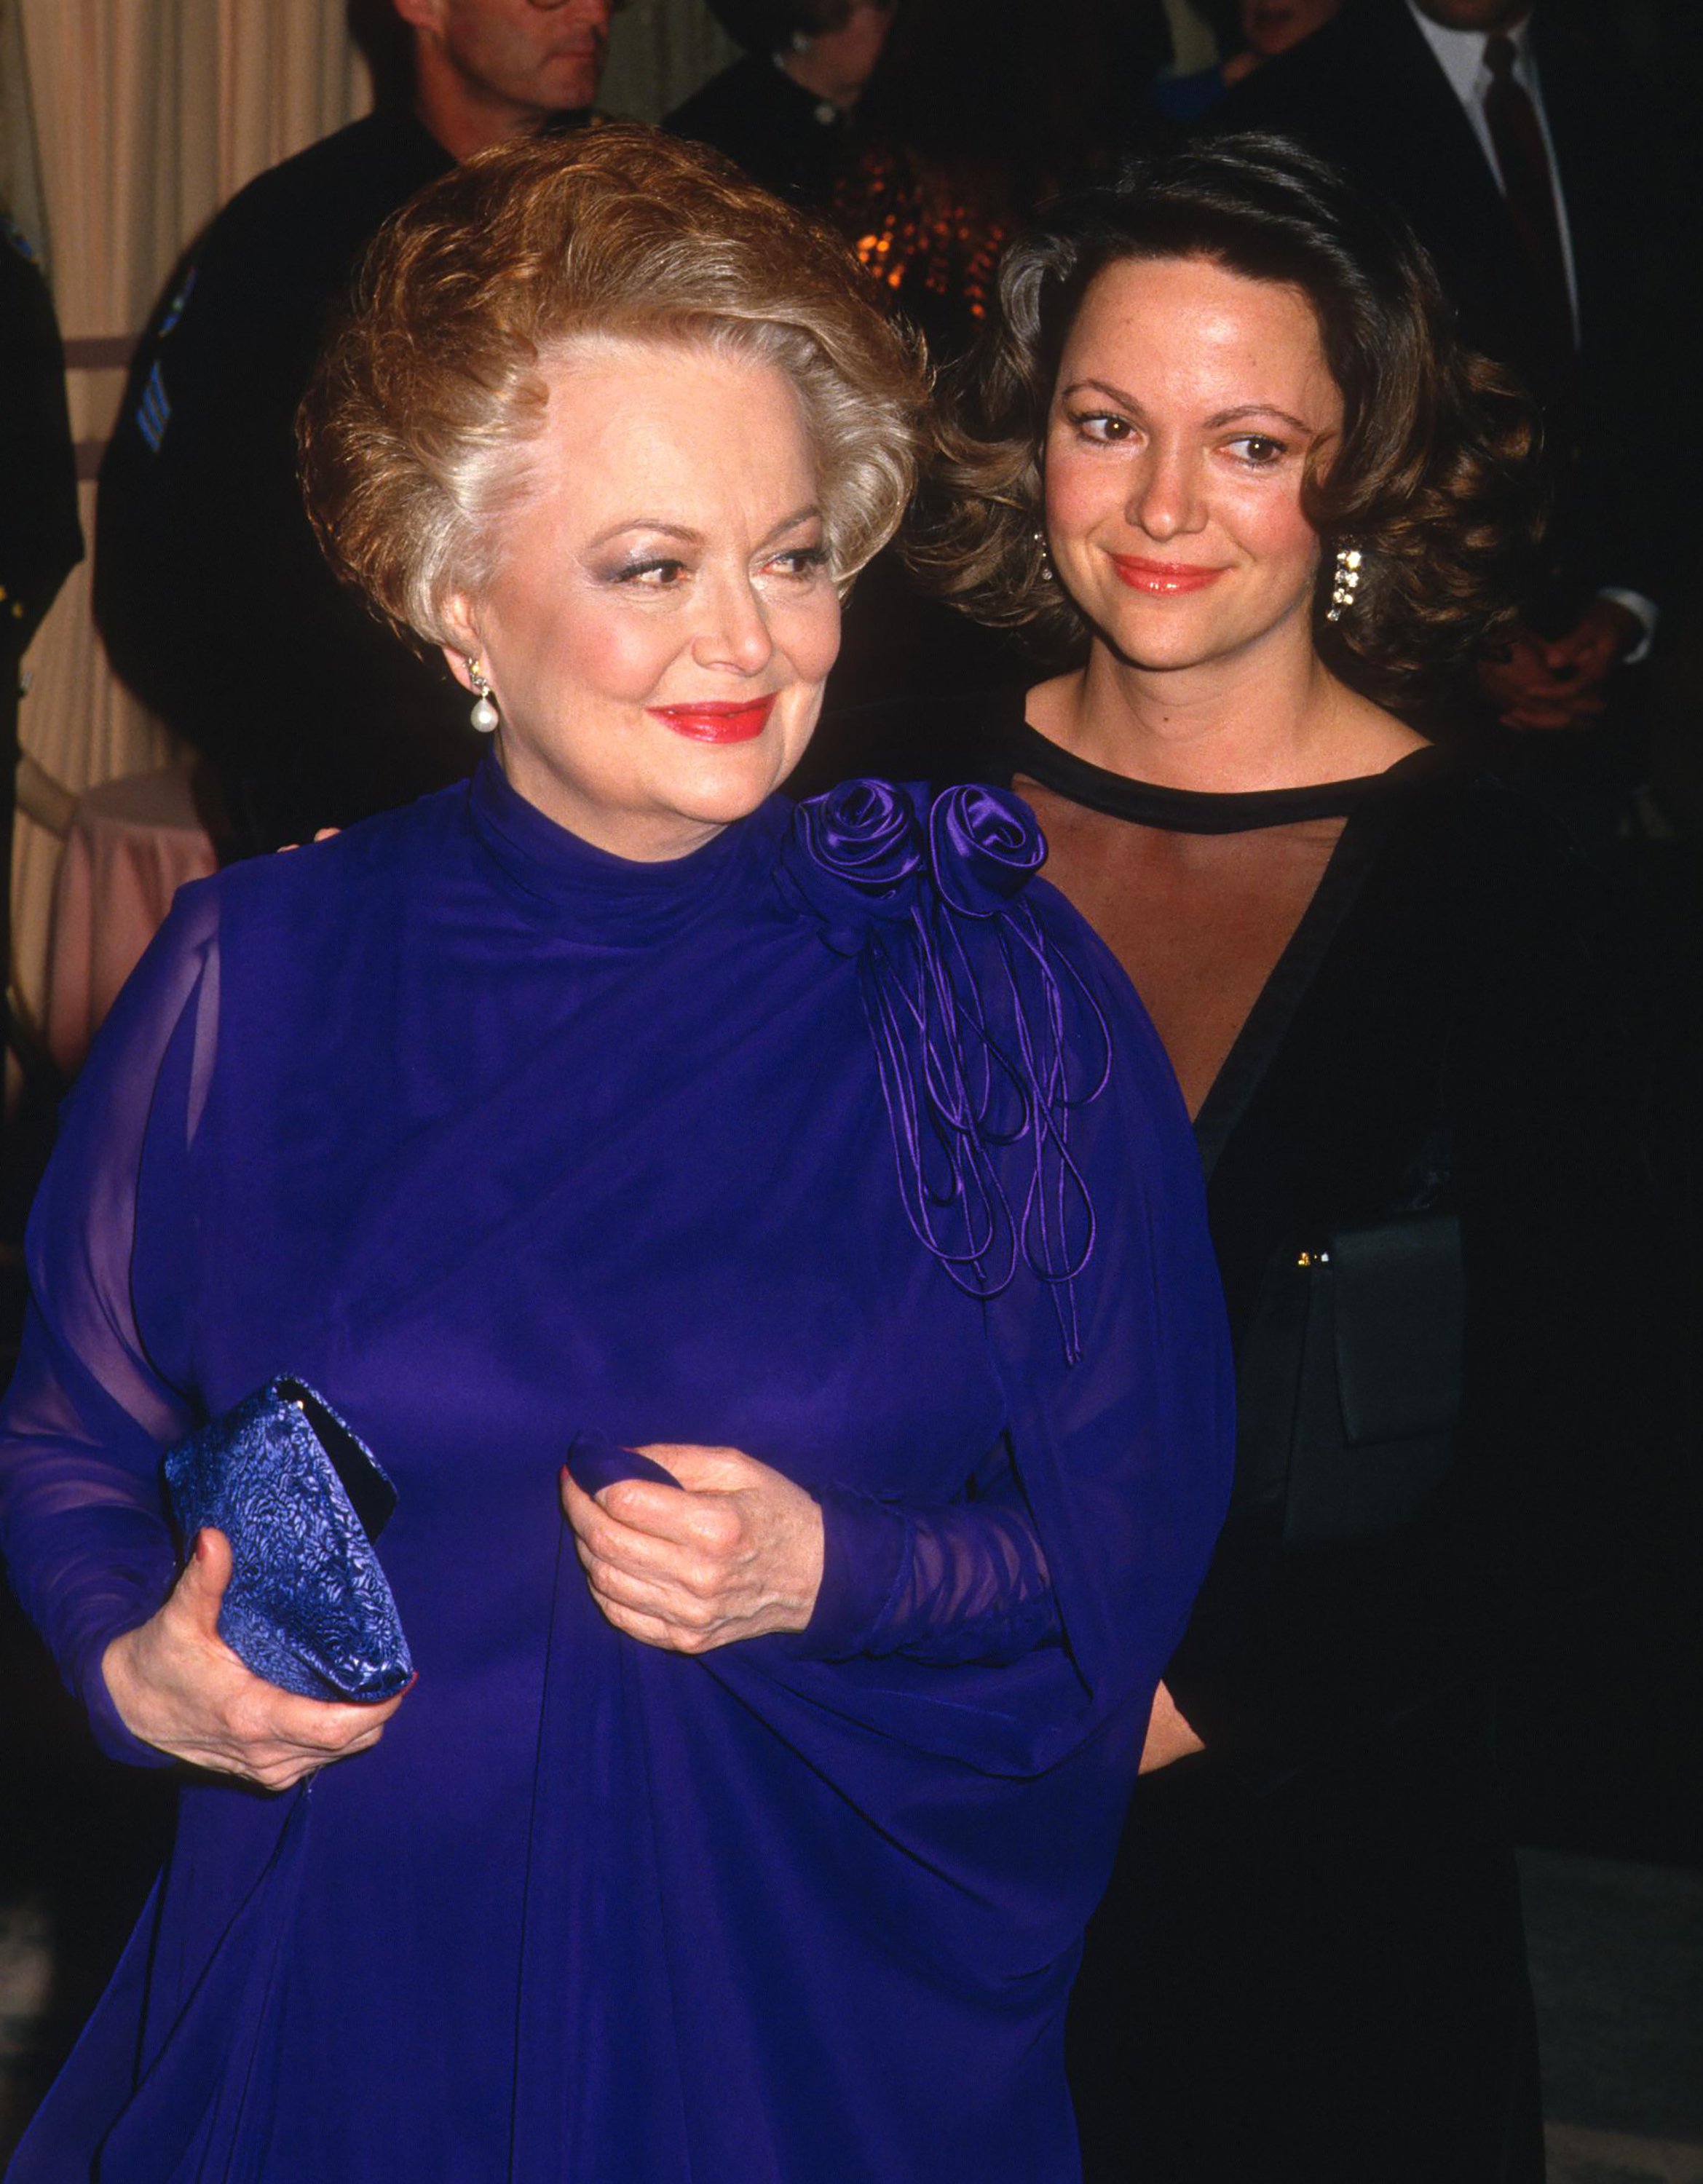 Olivia de Havilland and daughter Gisele Galante attend 44th Annual Golden Globe Awards at the Beverly Hilton Hotel in Beverly Hills, California on January 31, 1987 | Source: Getty Images